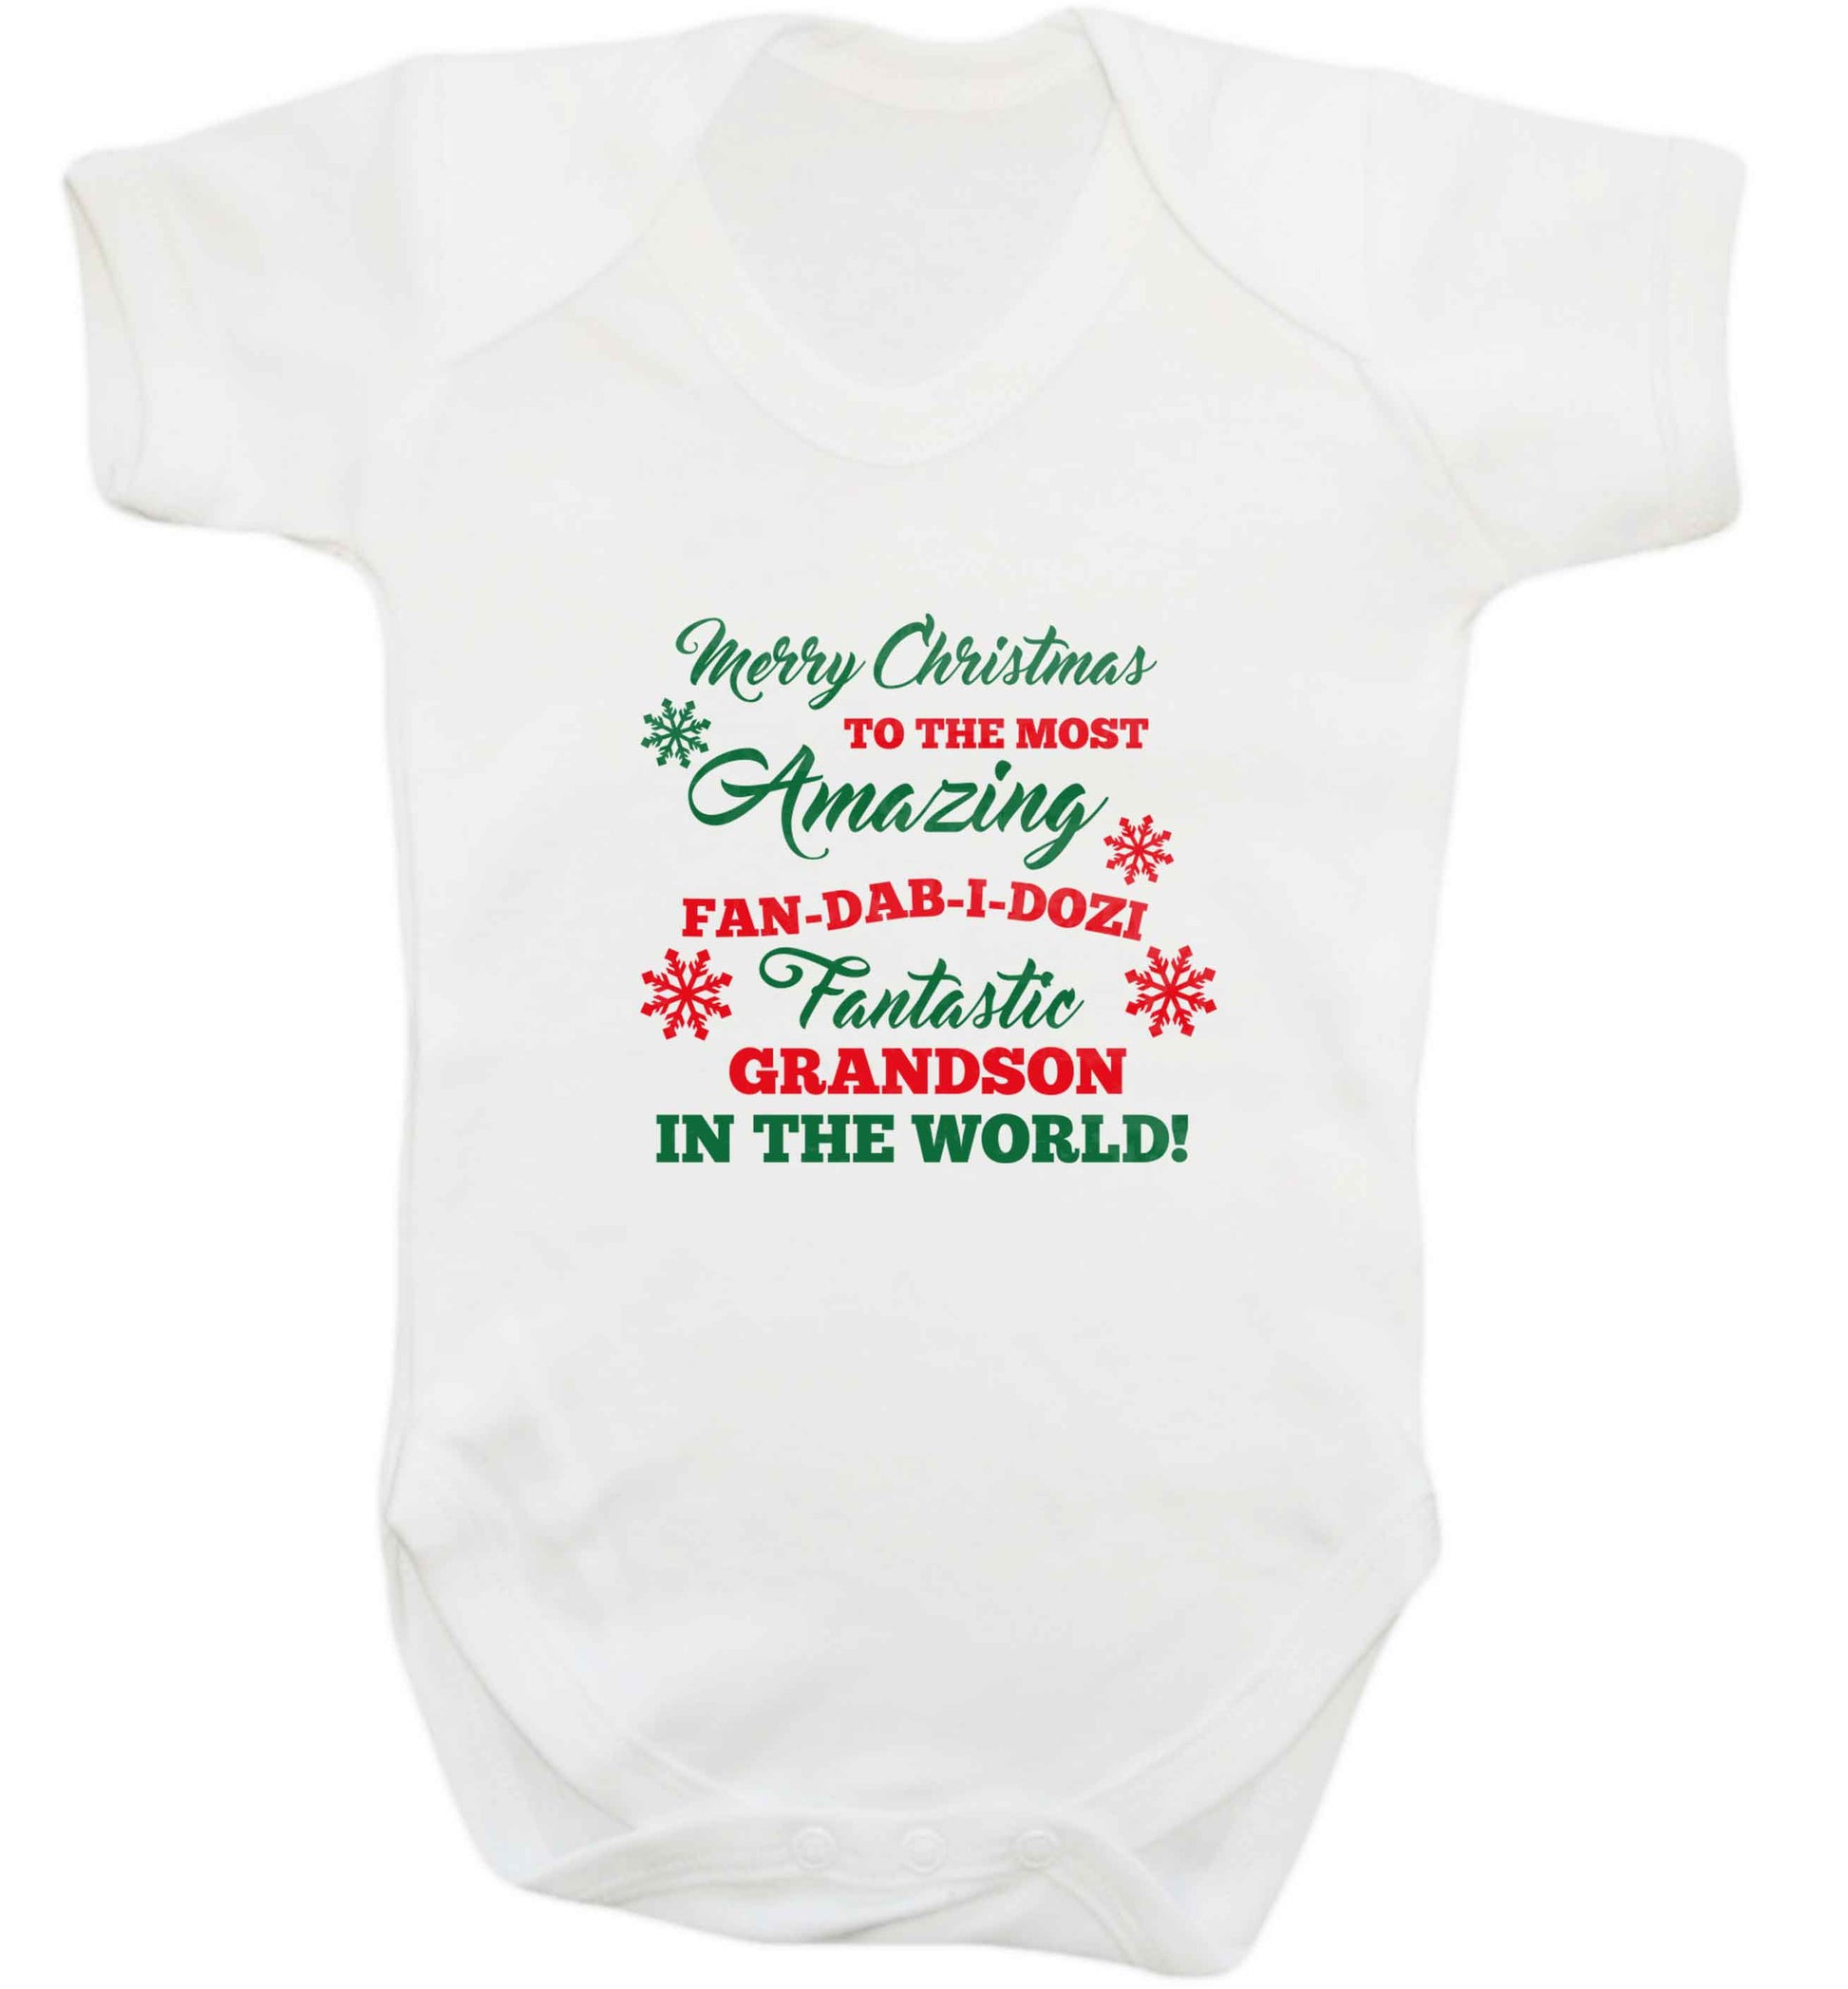 Merry Christmas to the most amazing fan-dab-i-dozi fantasic Grandson in the world baby vest white 18-24 months